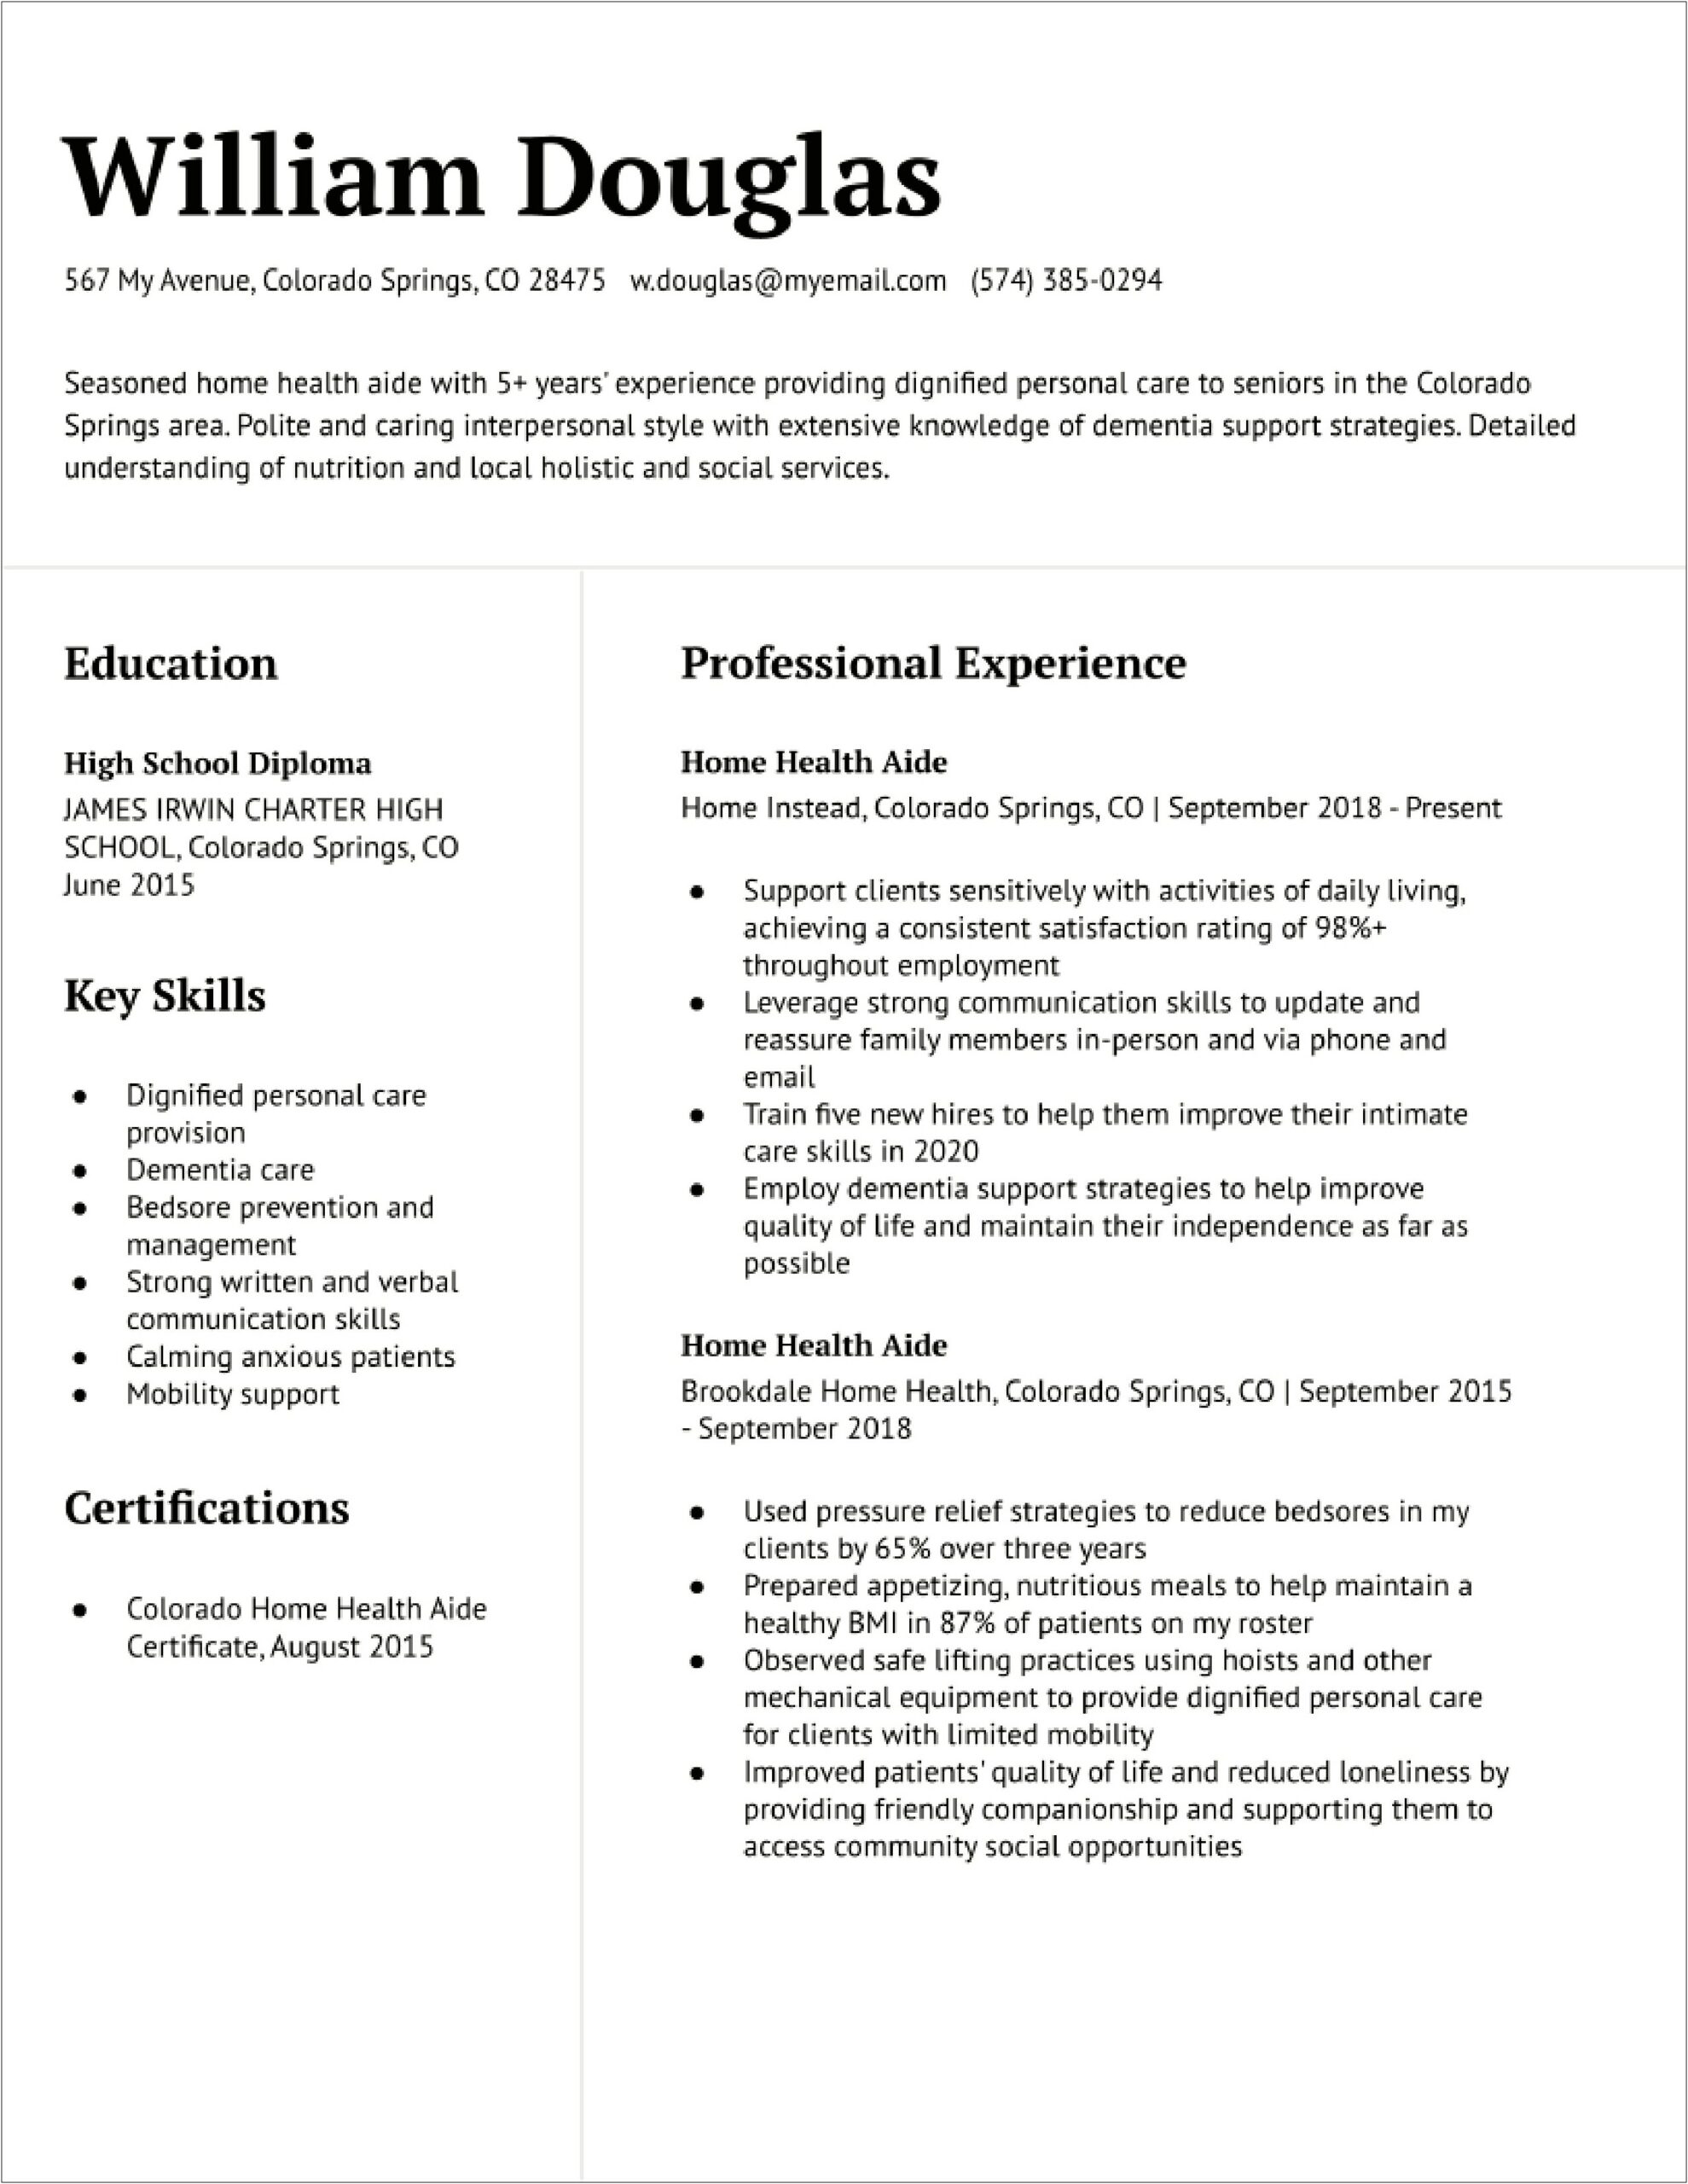 Home Health Care Experience For Resume